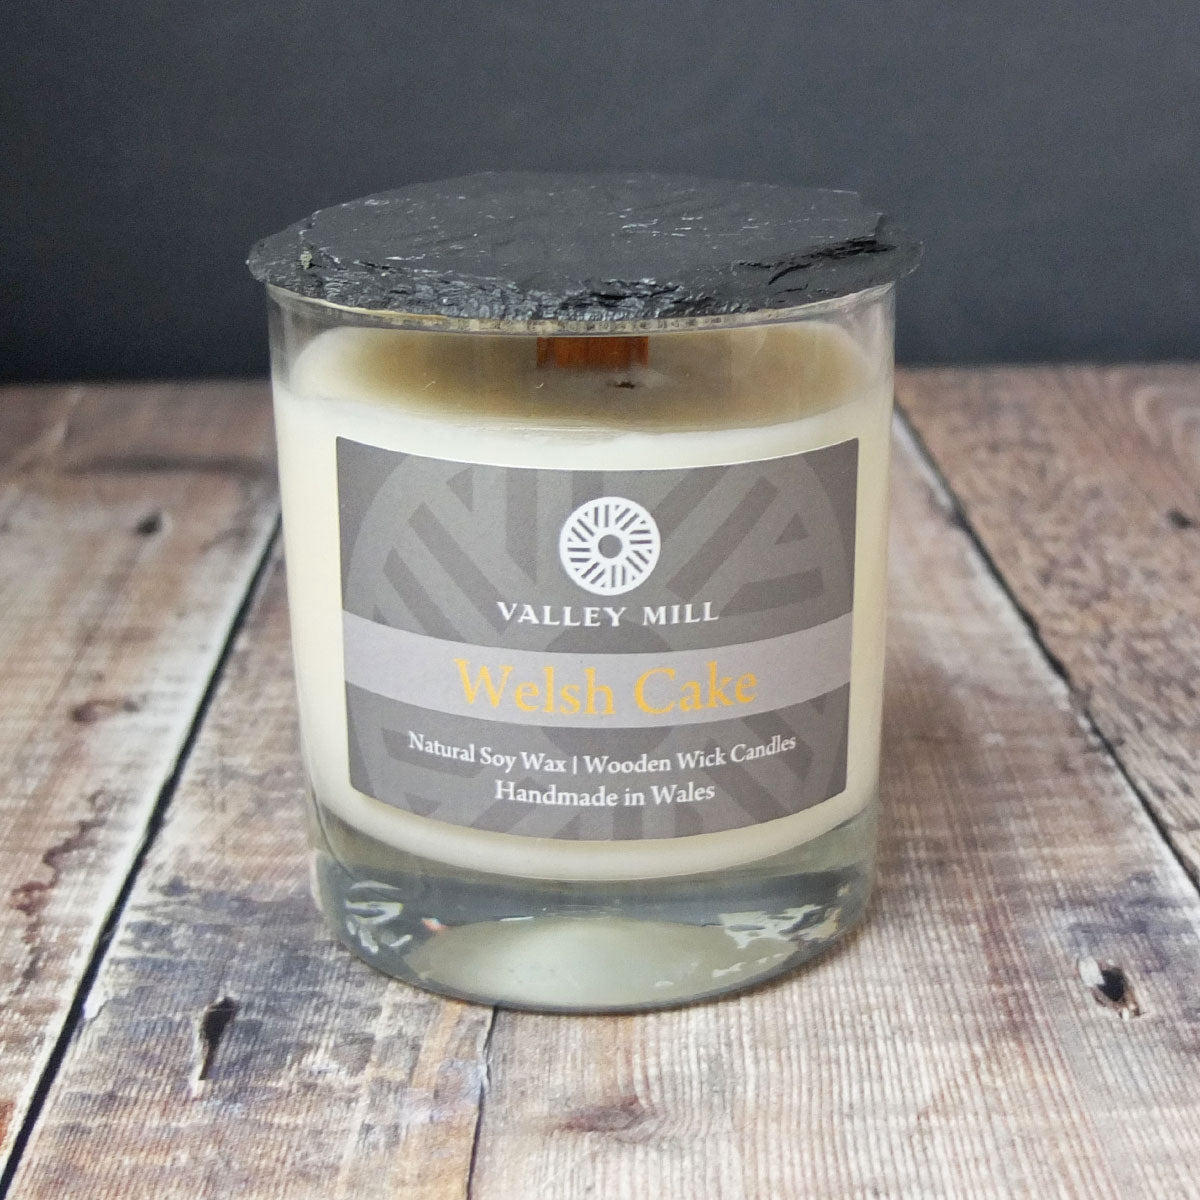 Valley Mill Welsh Cake Candle